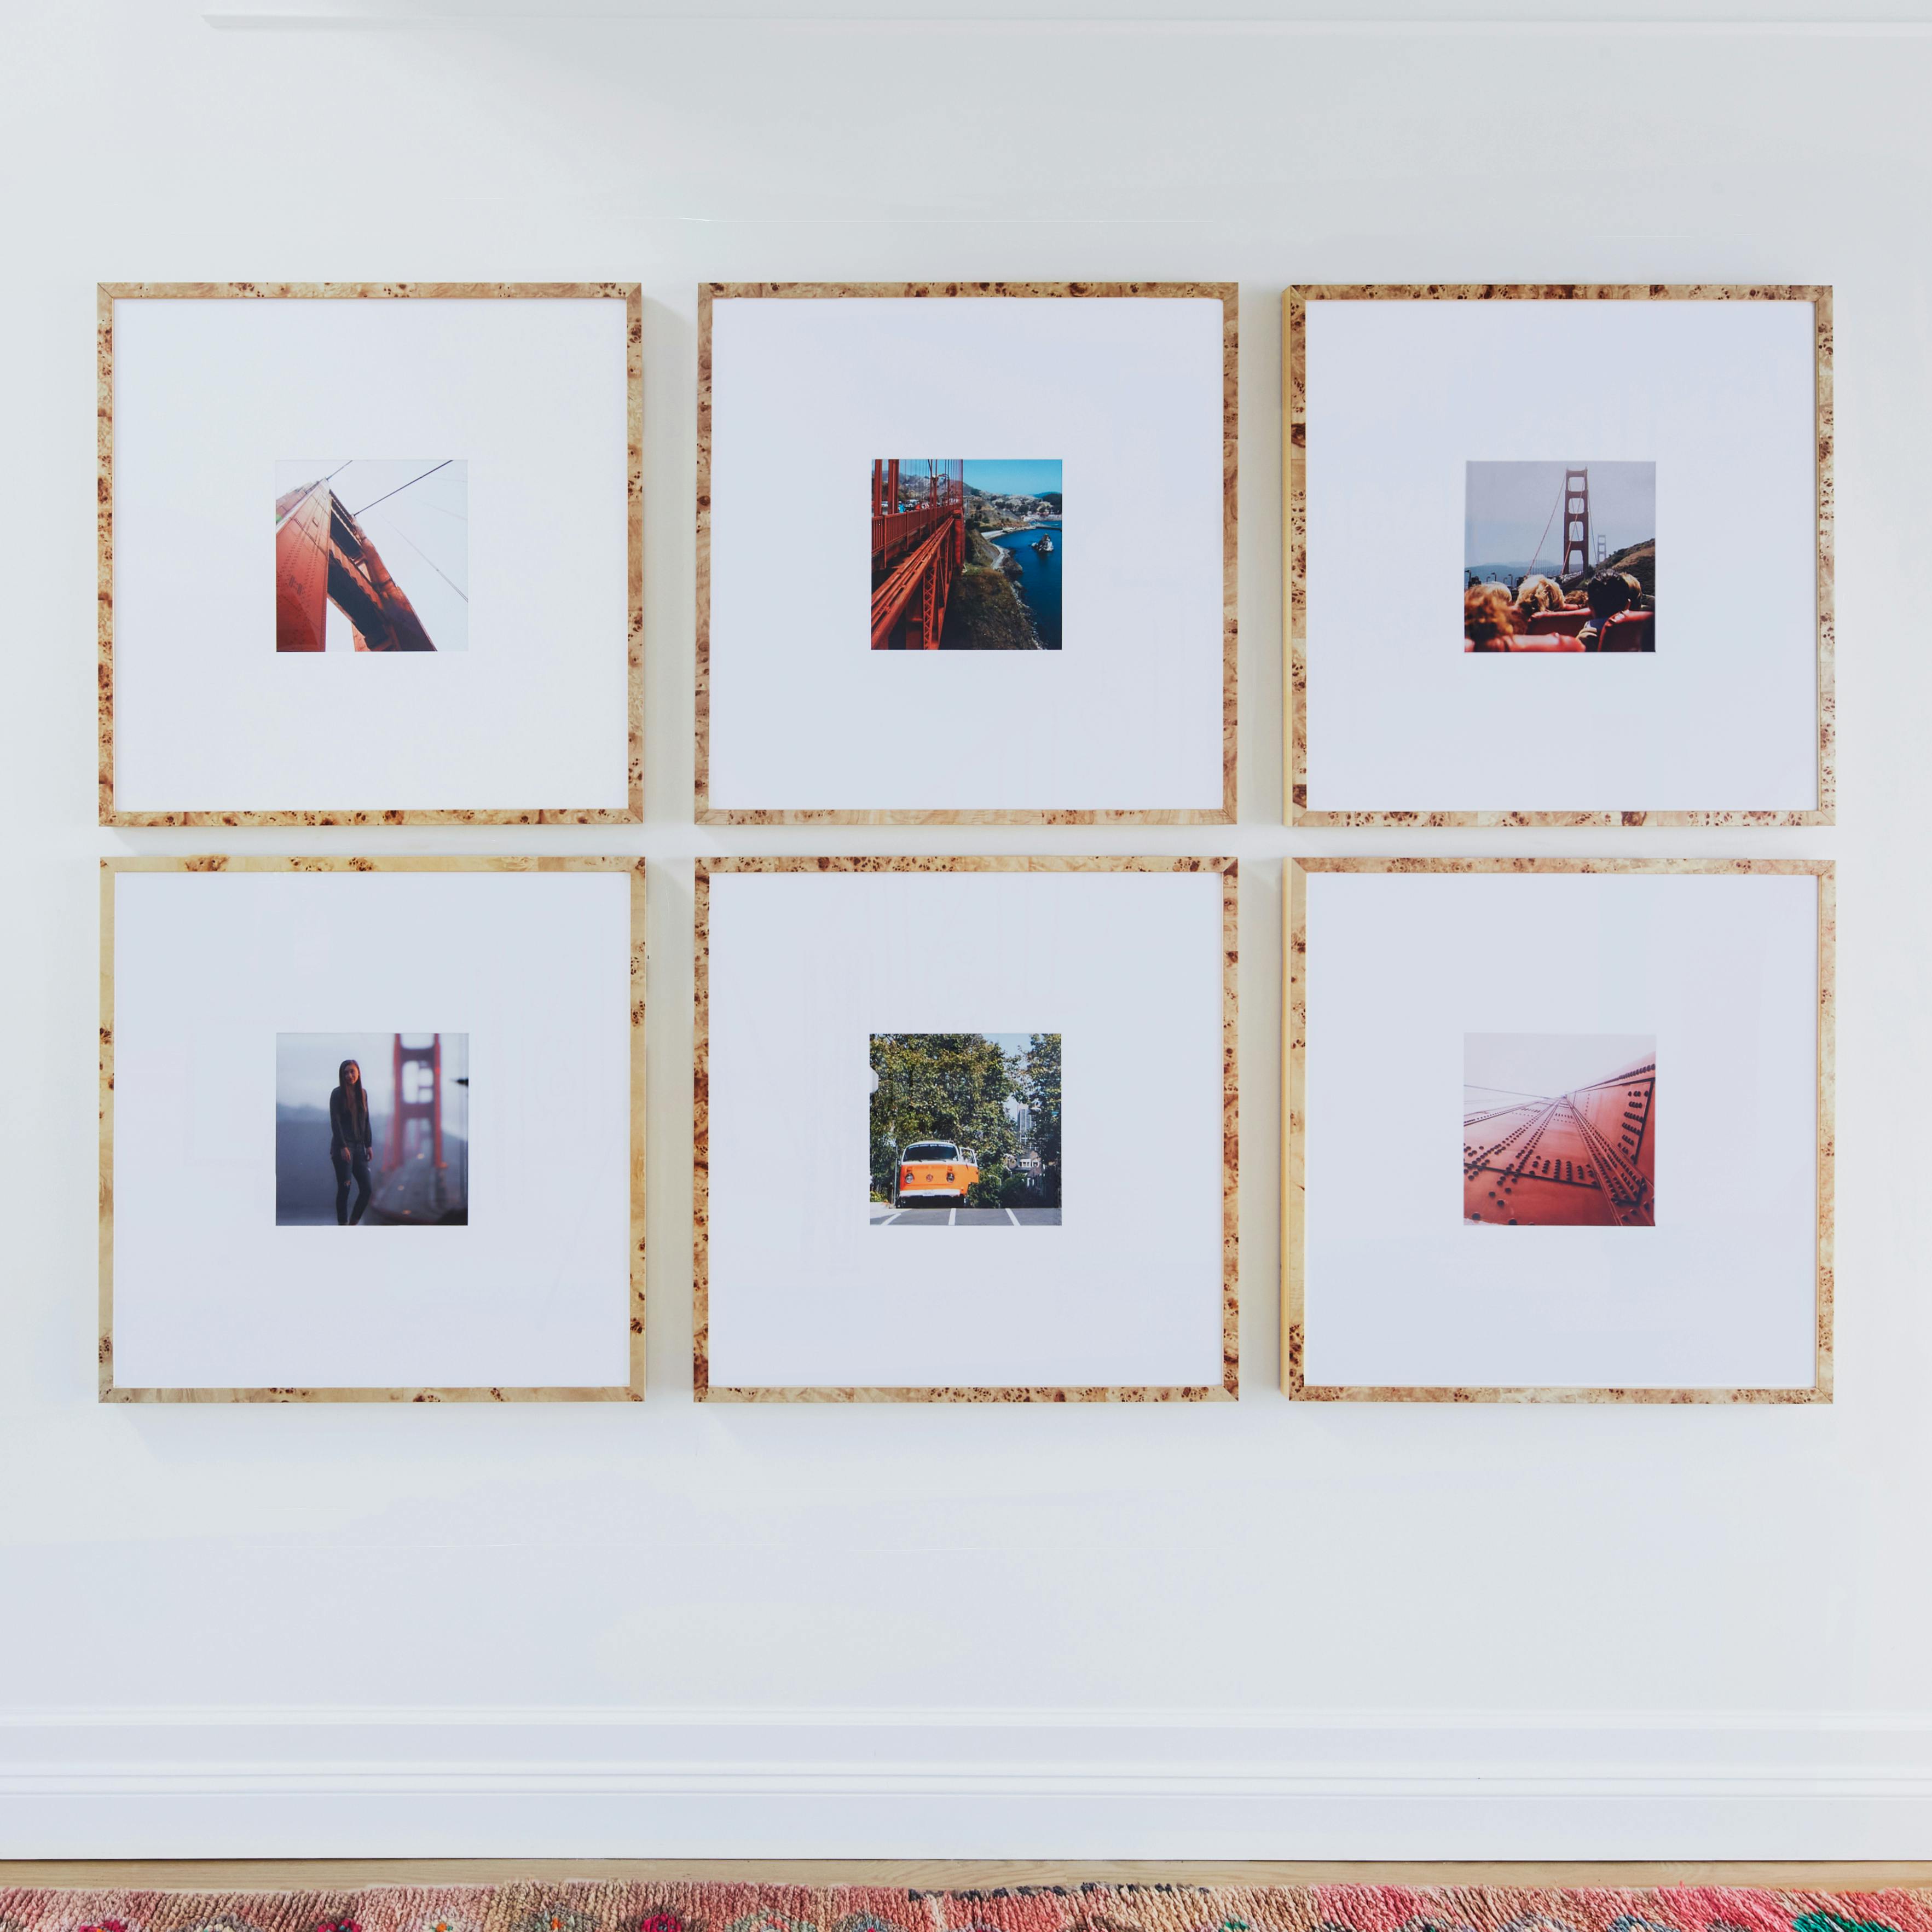 A gallery wall featuring six framed photographs with various urban and architectural themes.